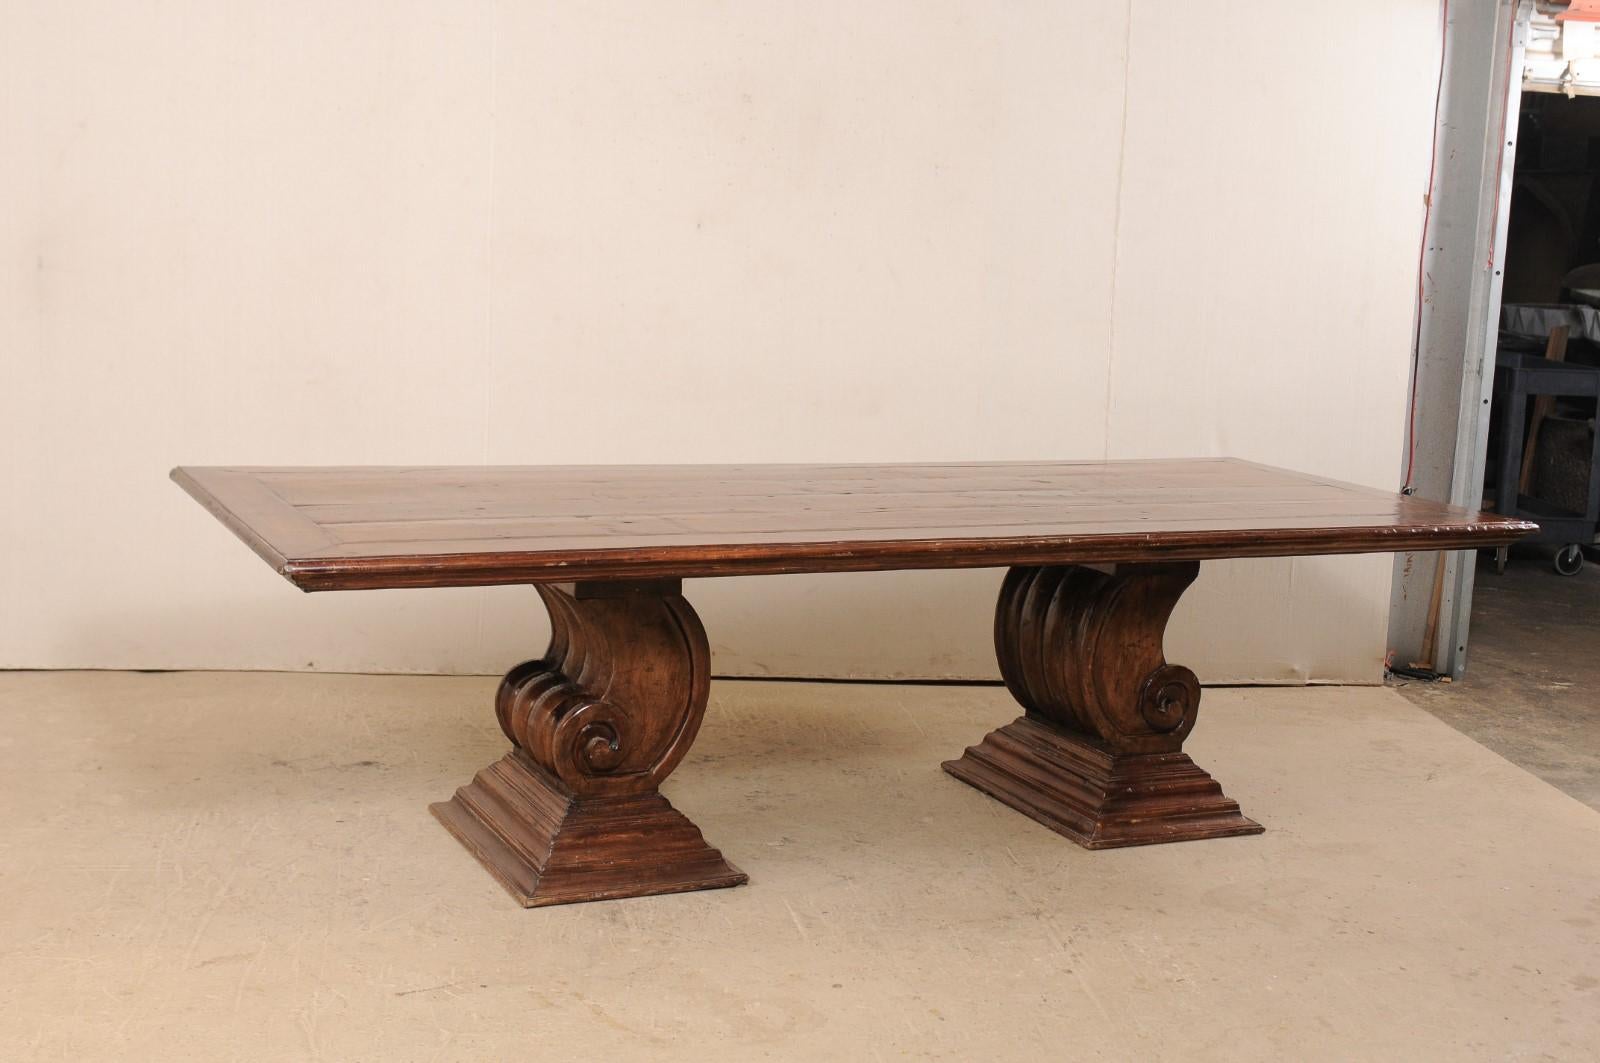 A vintage Brazilian dining room or conference table made of reclaimed peroba wood. This 9.5 foot long table from Brazil features a rectangular-shaped top, raised upon a pair of fabulous volute scrolled pedestal bases. Each of the bases (or legs) are